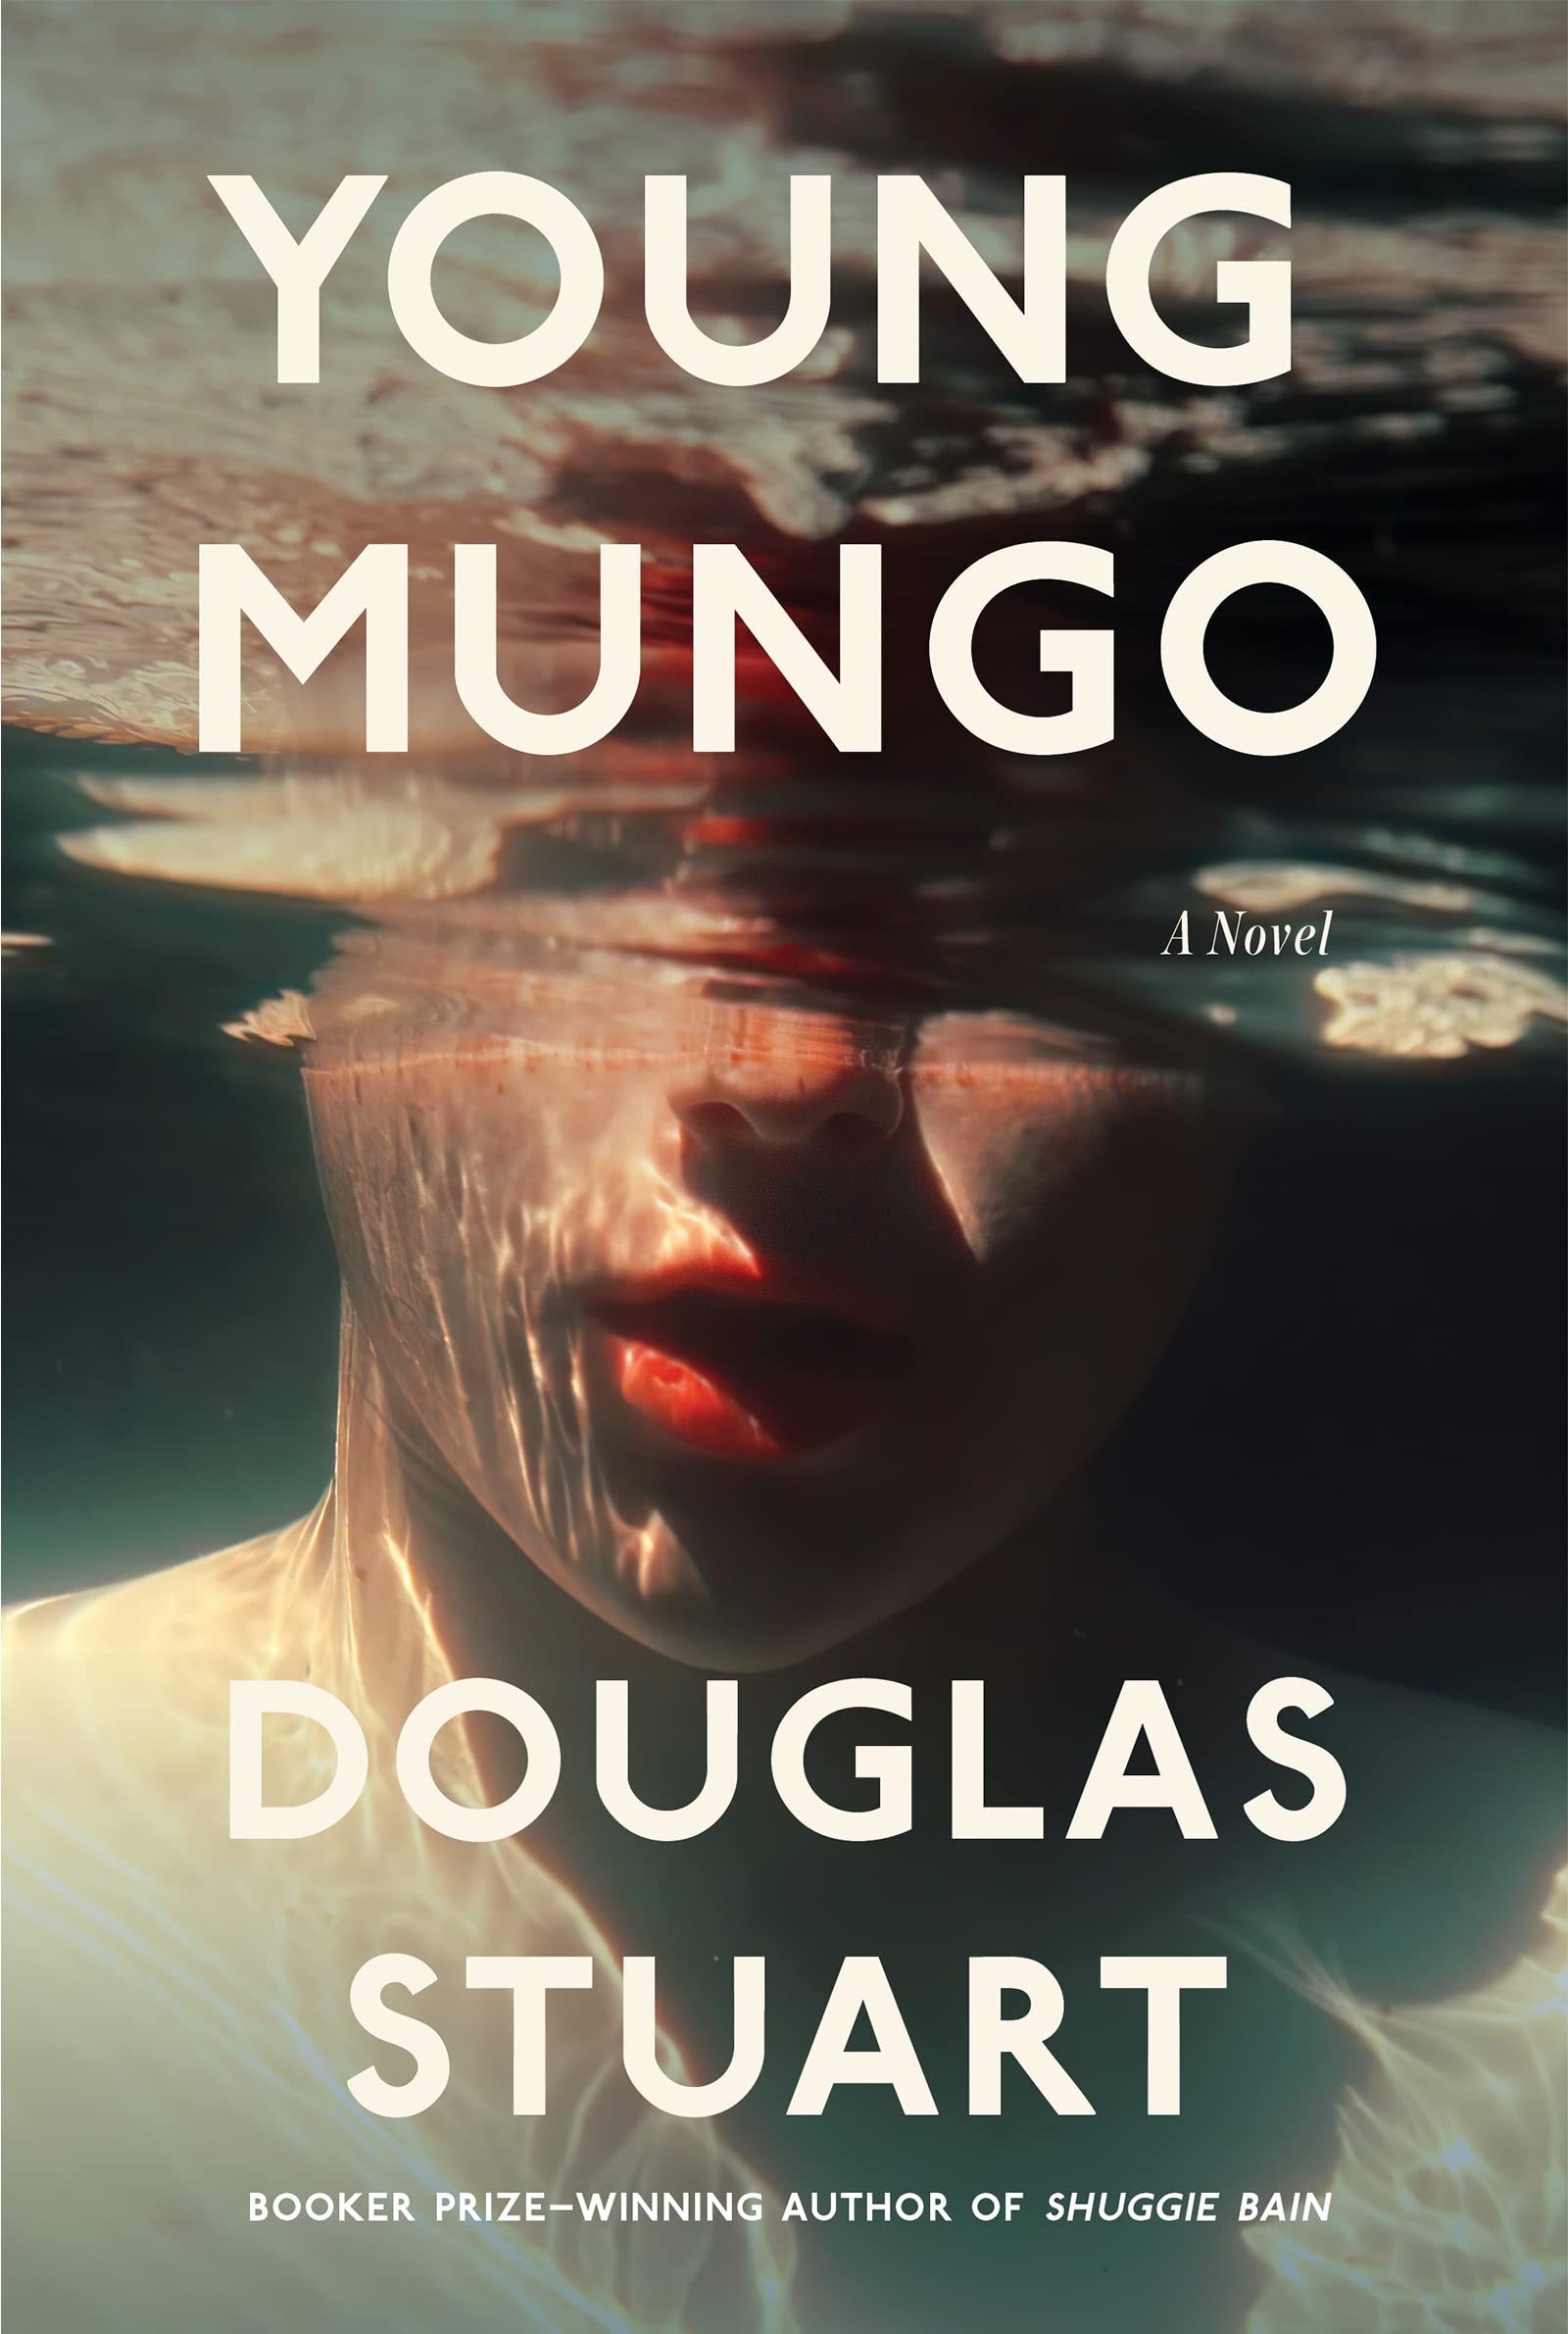 "Young Mungo, a novel by Douglas Stewart; Booker prize-winning author of Shuggie Bain" — Image shows a young man under water